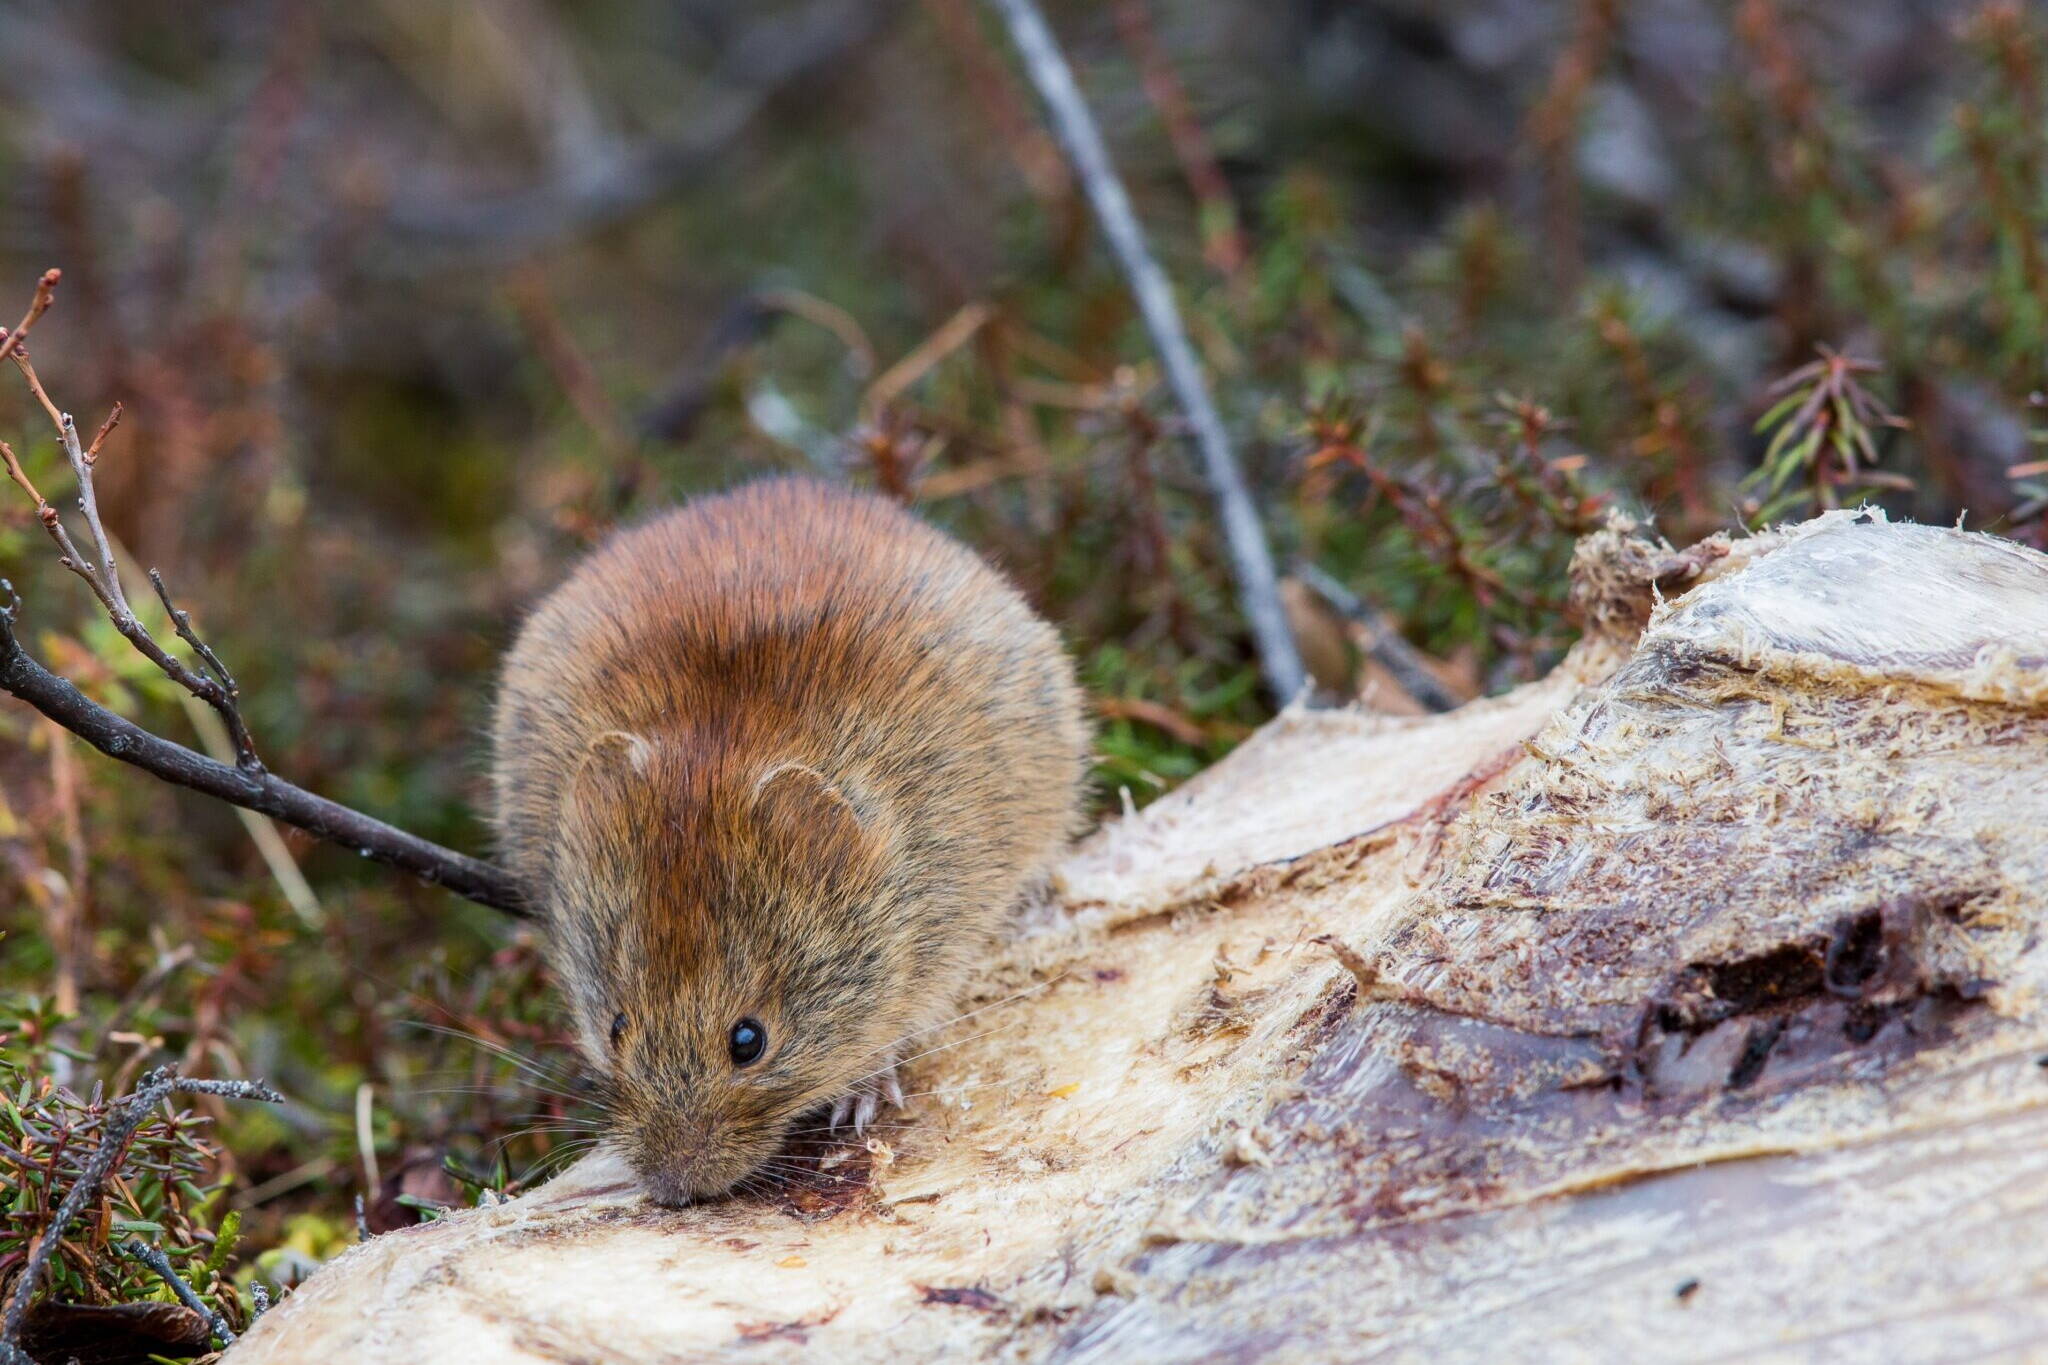 A northern red-backed vole is seen in this undated photo. Small mammals, especially northern red-backed voles, have been found to be infected with Alaskapox, a disease that was not identified until 2015. State health officials on Friday reported that a man died from the infection in January in the first known fatality associated with the viral disease. (Photo by Jim Dau/provided by Alaska Department of Fish and Game)